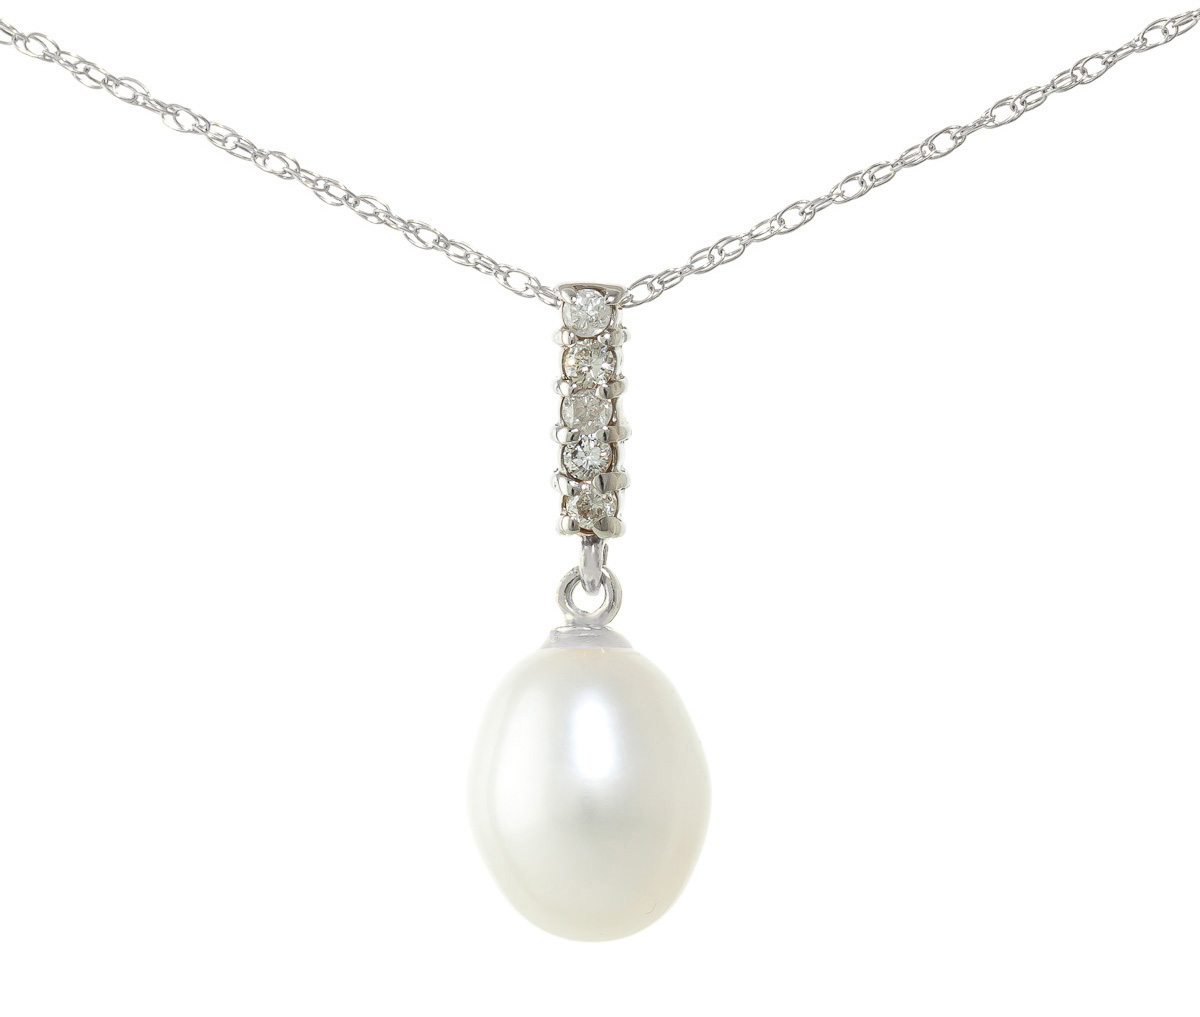 Oval Cut Pearl Pendant Necklace 4.08 ctw in 9ct White Gold